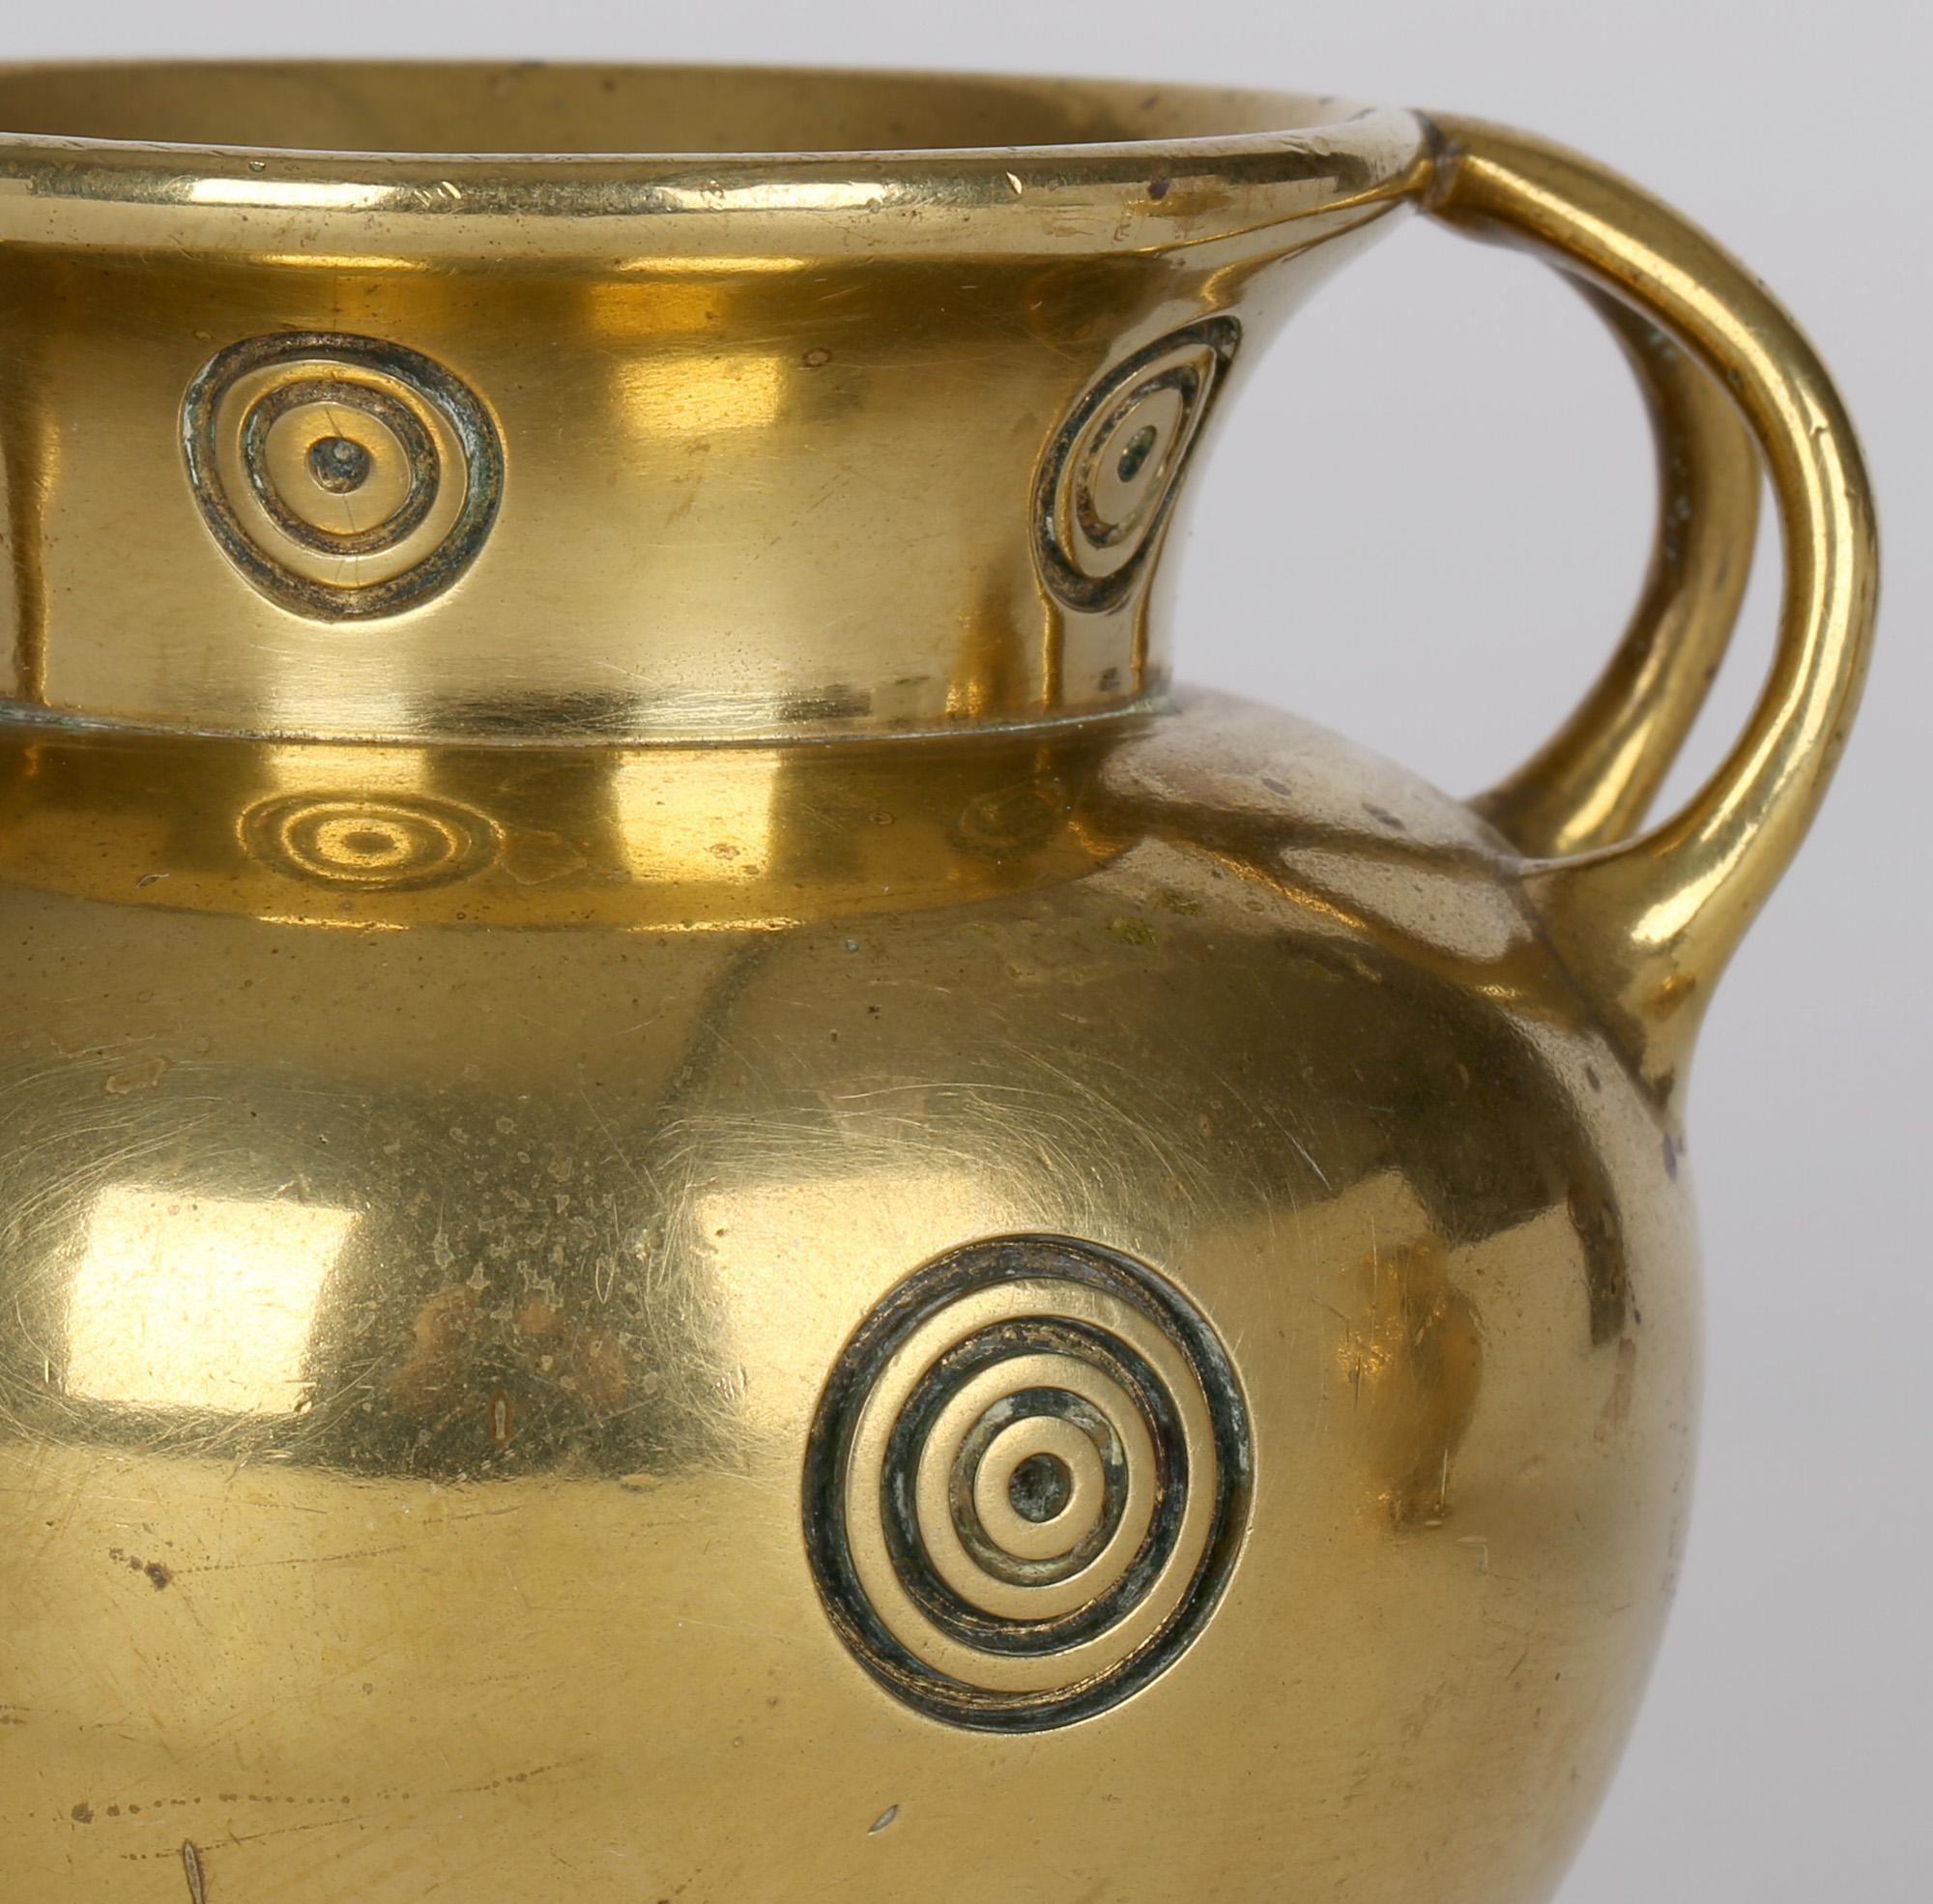 Stylish pair Arts & Crafts Benham & Froud twin handled brass vases with ‘bullseye’ and grooved decoration designed by Christopher Dresser (British, 1834-1904) and dating from around 1885. These heavily made vases art of rounded shape standing on a